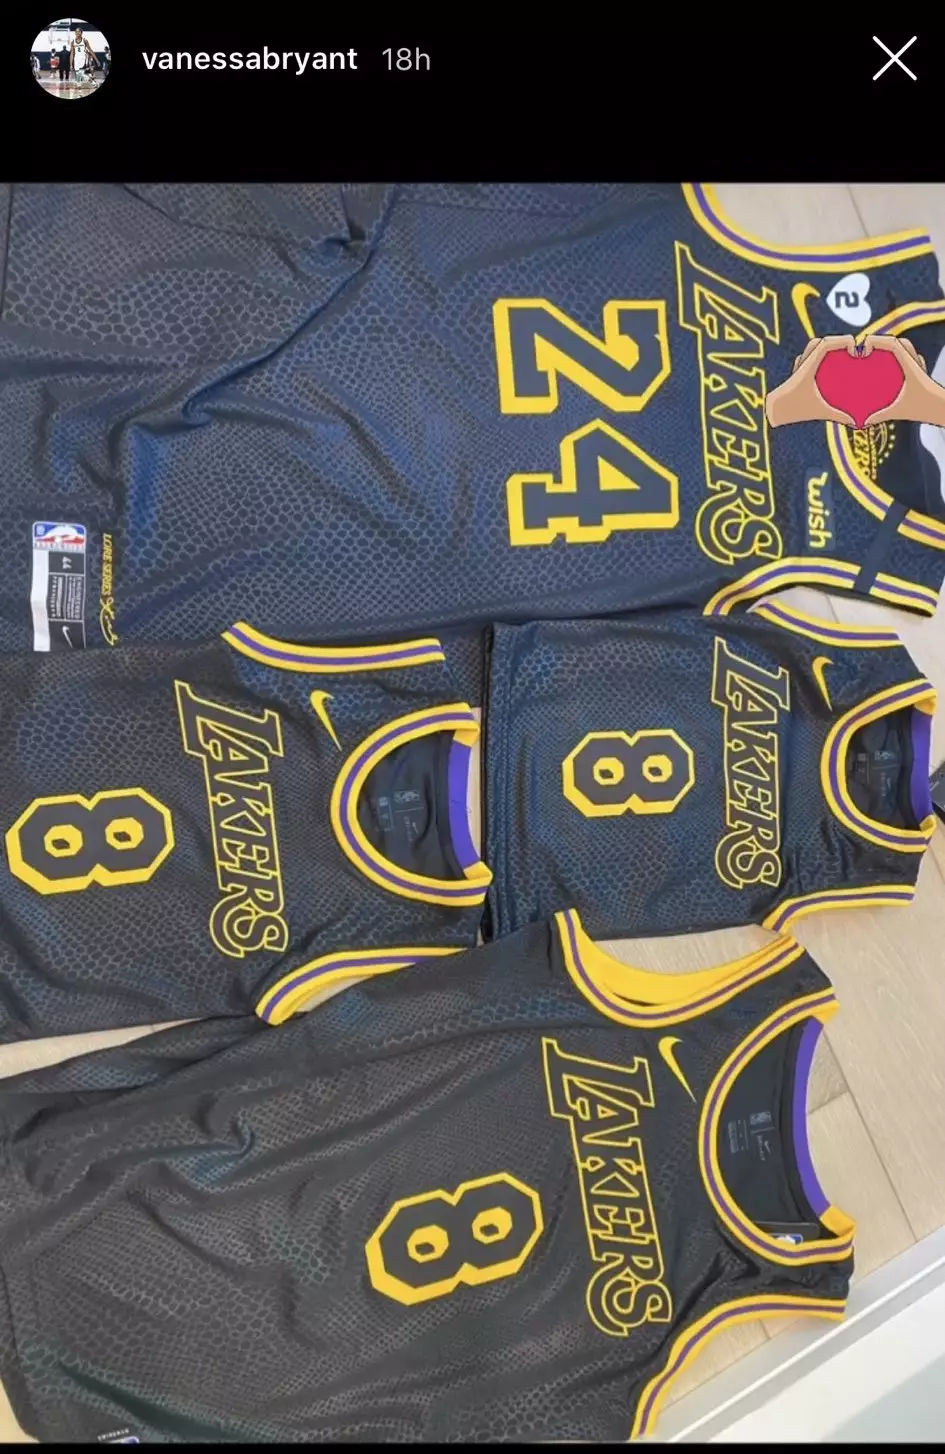 Vanessa Bryant shared a picture of the Black Mamba jerseys on social media.